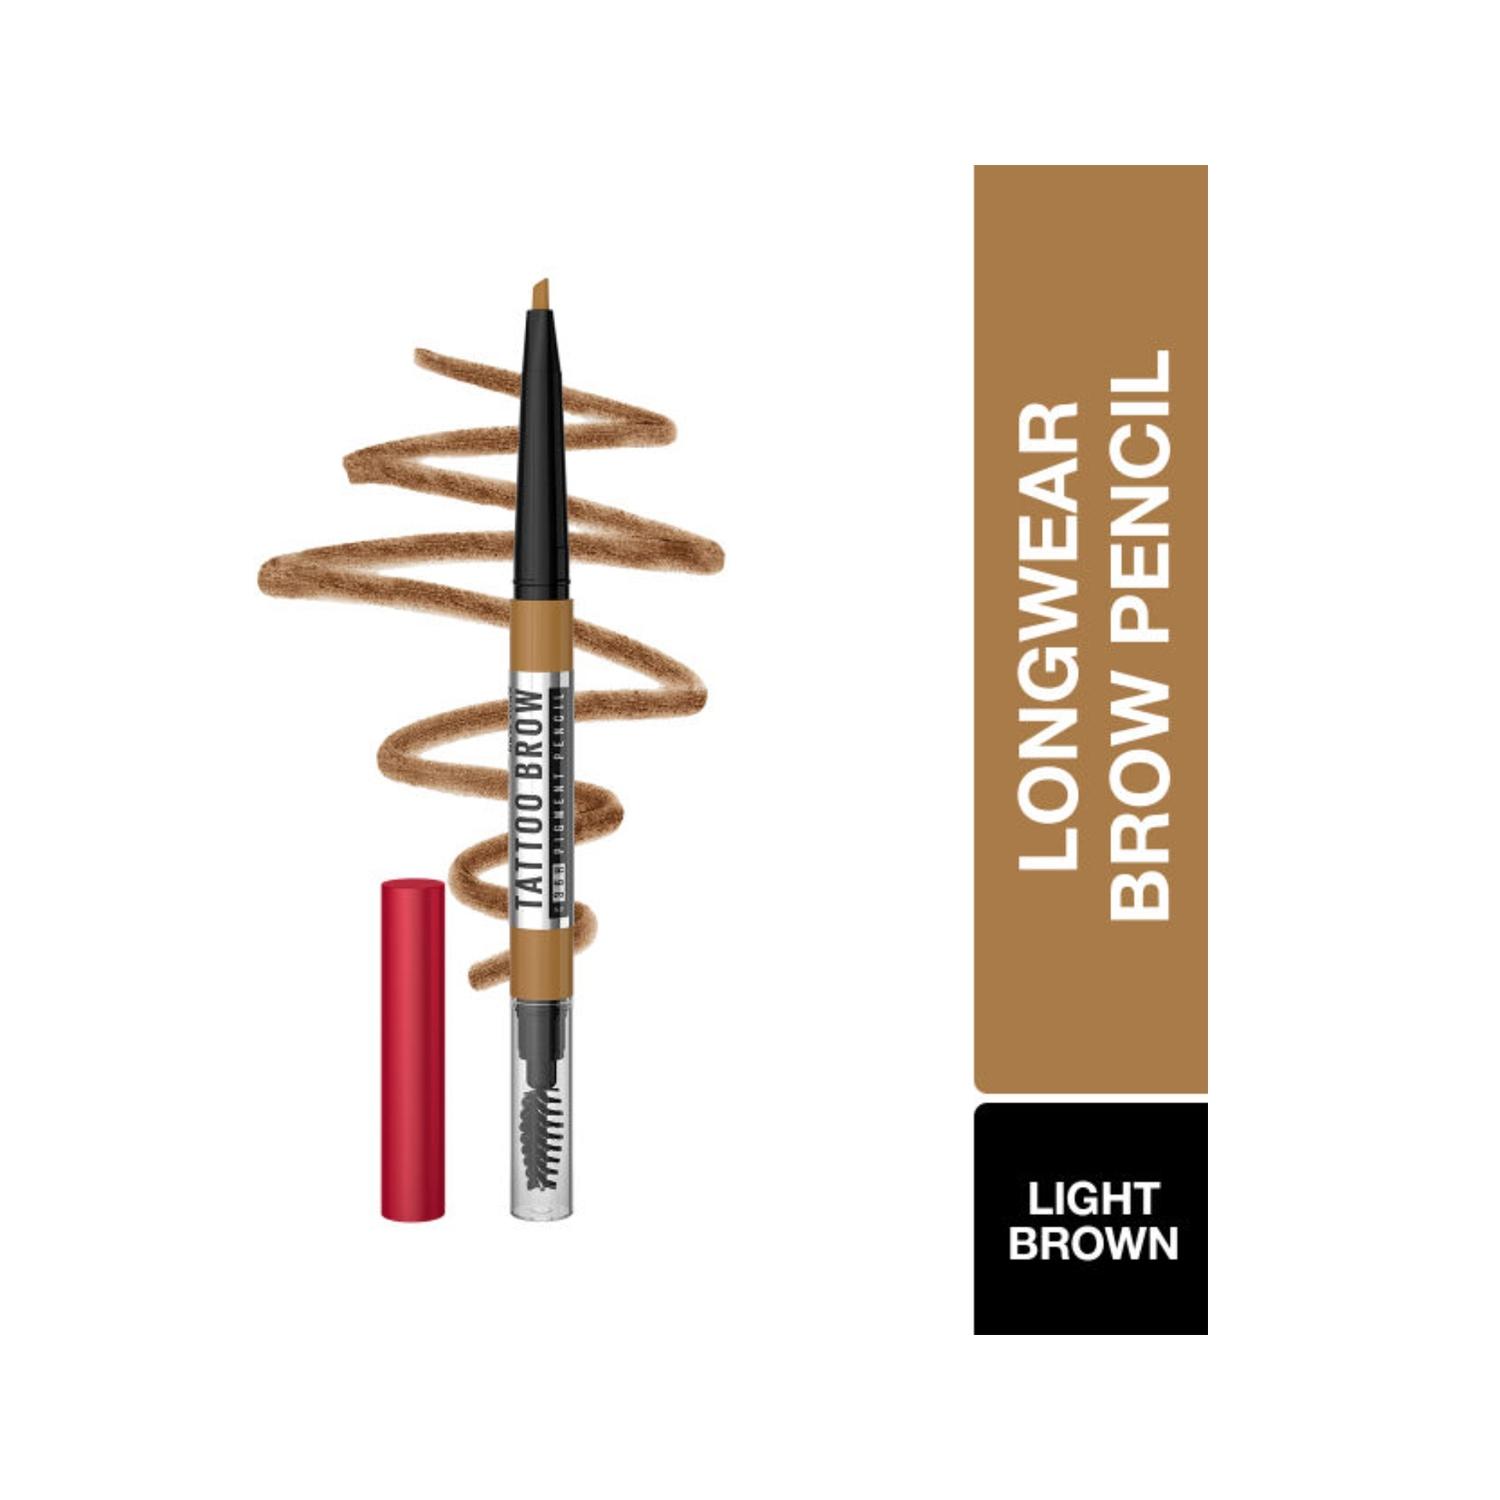 maybelline new york 36h brow pencil - light brown (0.25g)